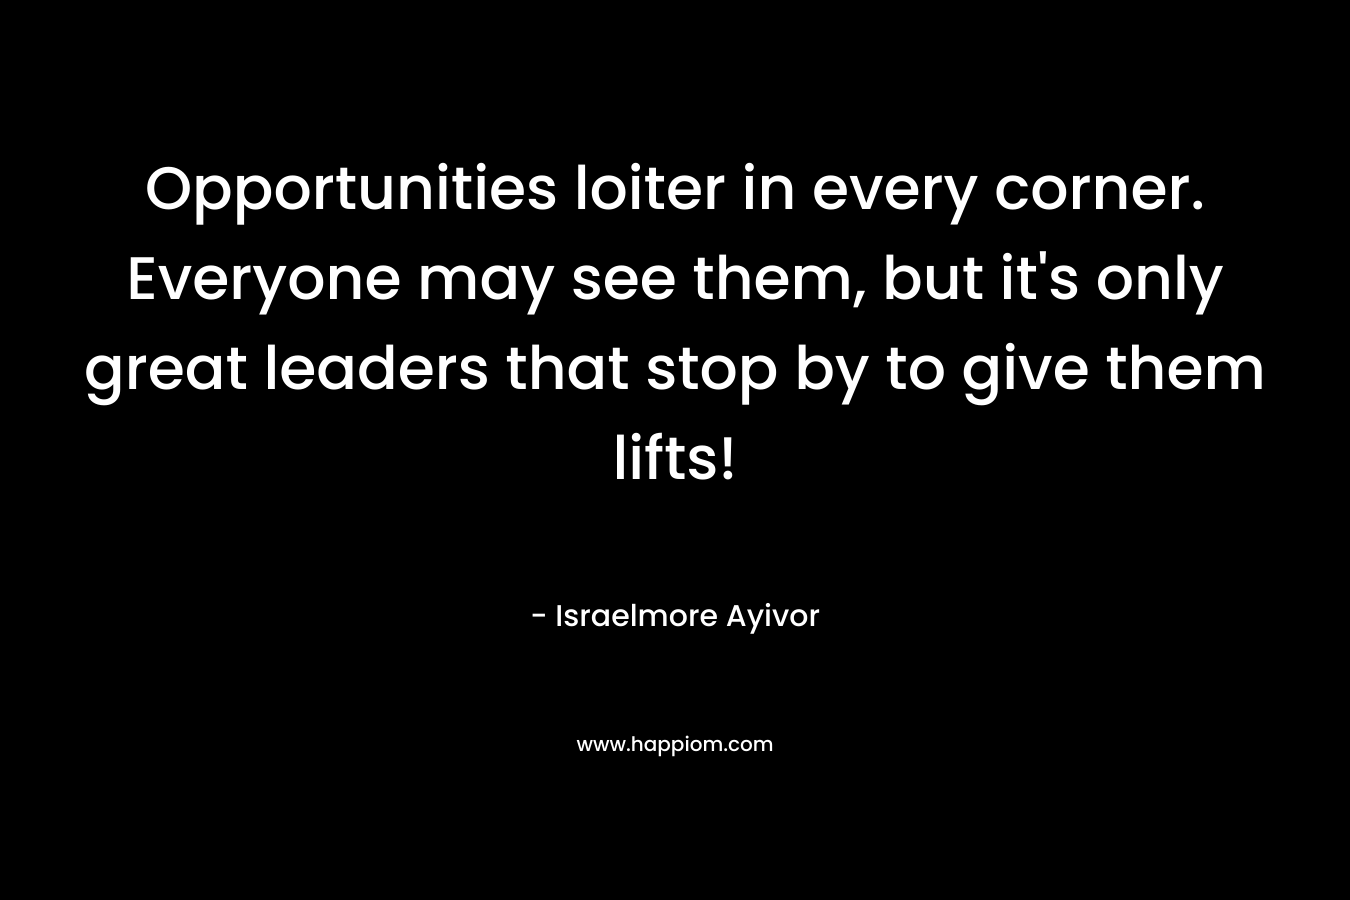 Opportunities loiter in every corner. Everyone may see them, but it’s only great leaders that stop by to give them lifts! – Israelmore Ayivor